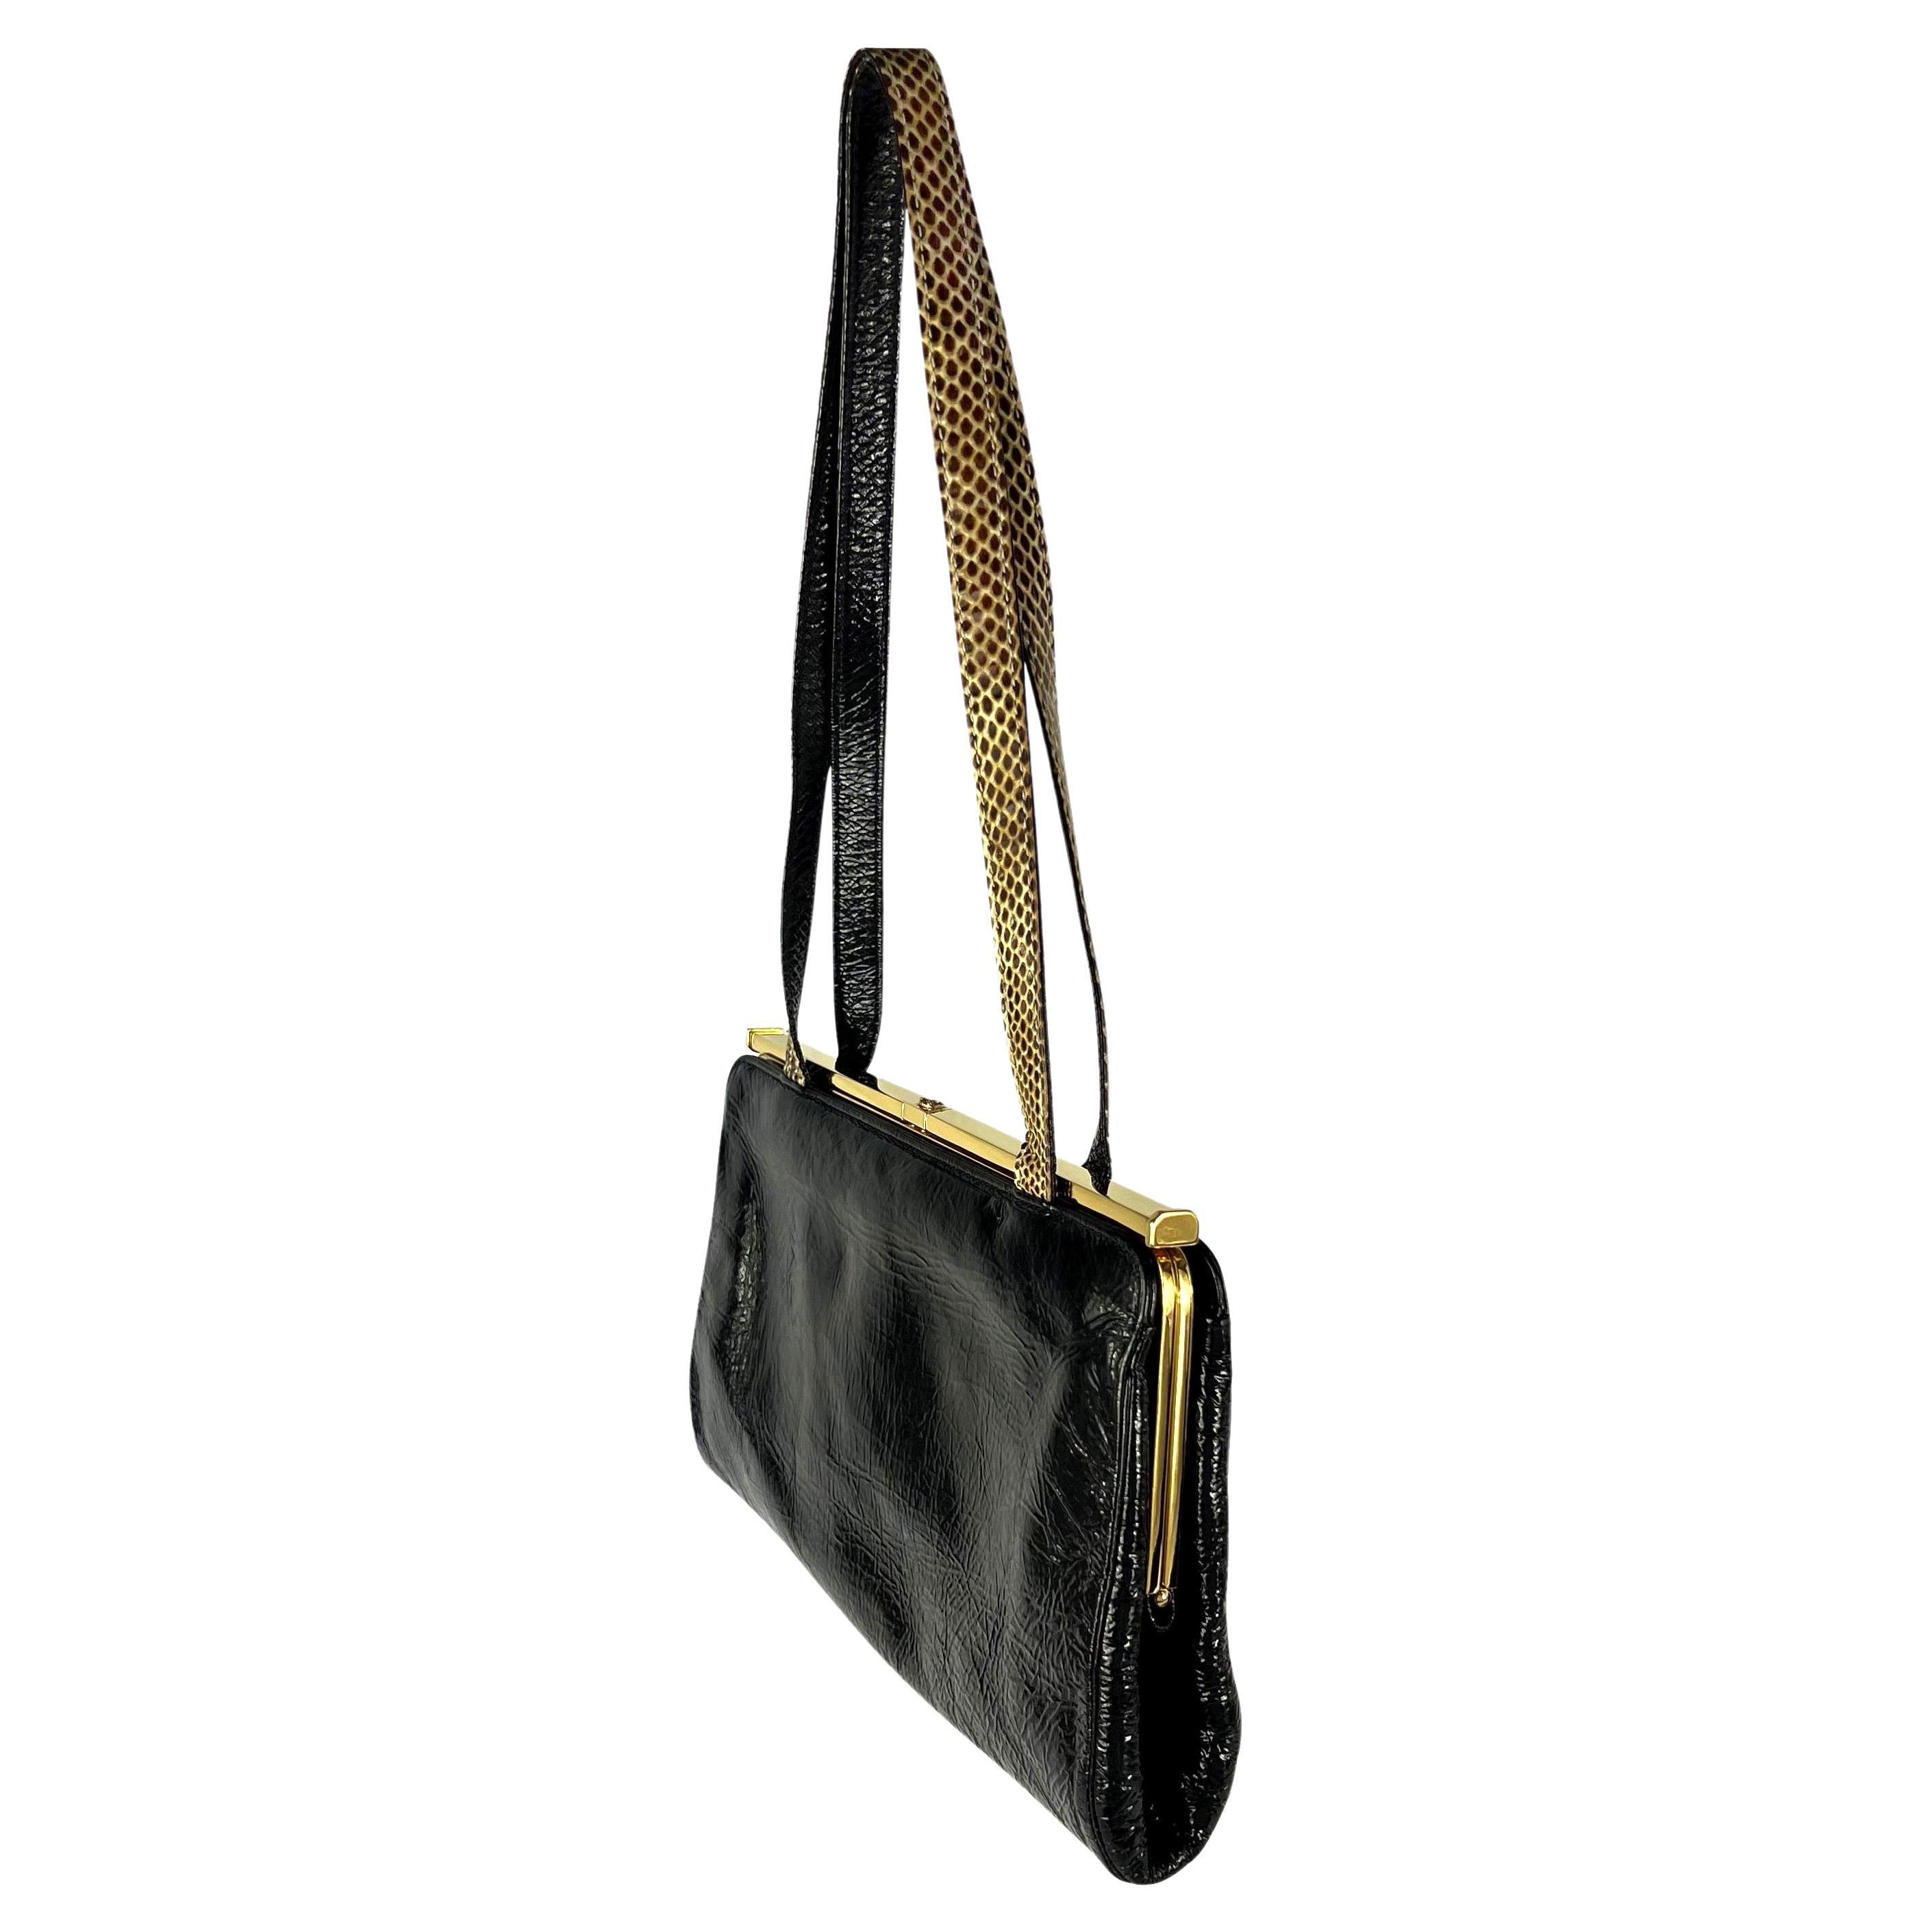 Noir F/W 2000 Gianni Versace by Donatella Black Patent Medusa Lock Small Bag for Gianni Versace for Gianni Versace for Gianni Versace by Donatella Black Patent Medusa Lock Small Bag en vente